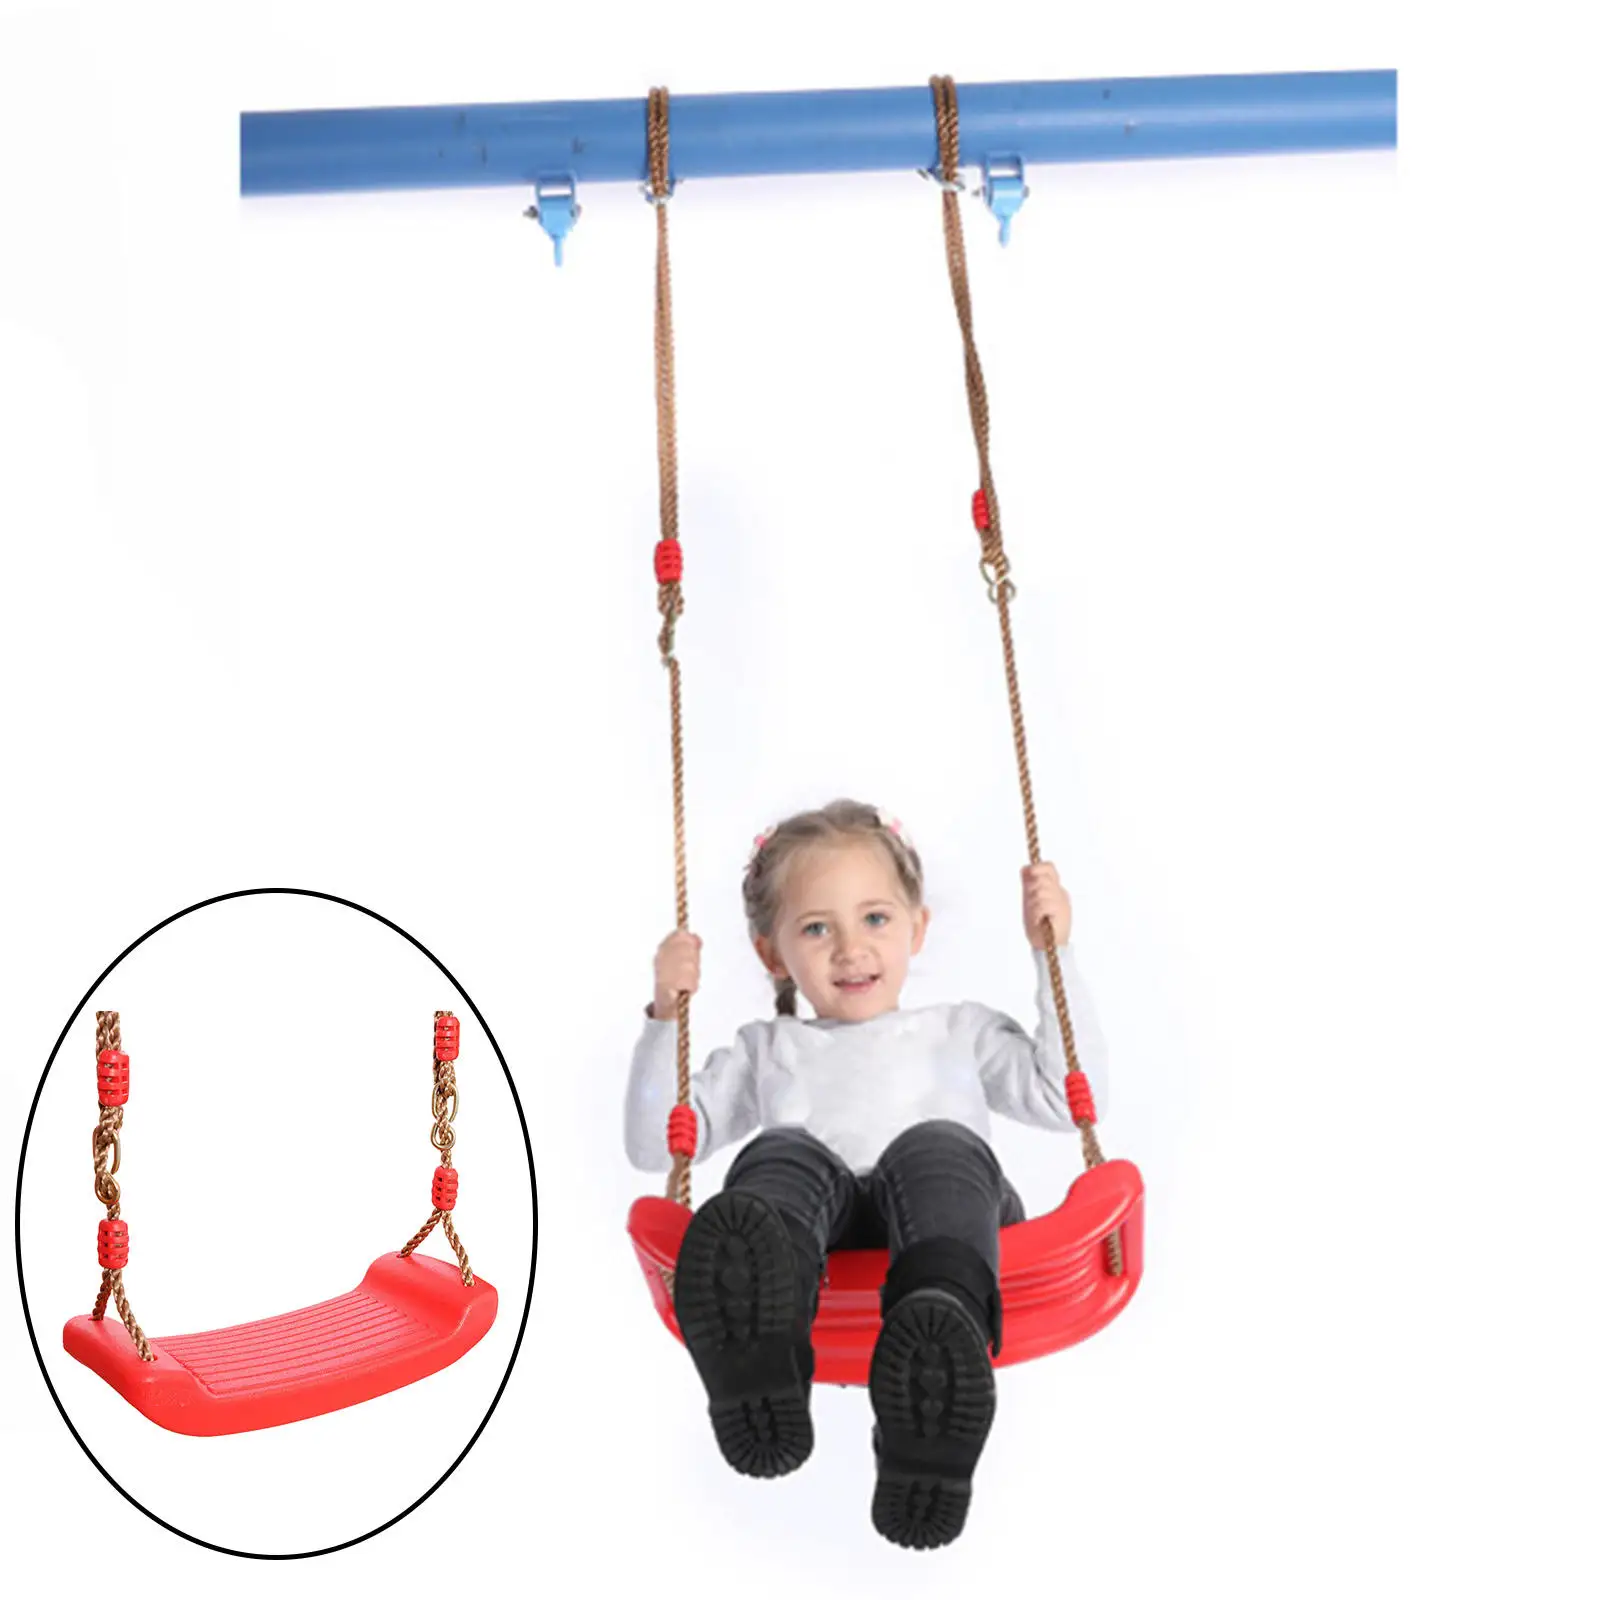 Swing Seat Set Playset with Tree Hanging Straps Hooks with Heavy Duty Durable Replacement Rope Tree Swing Seat for Children Baby